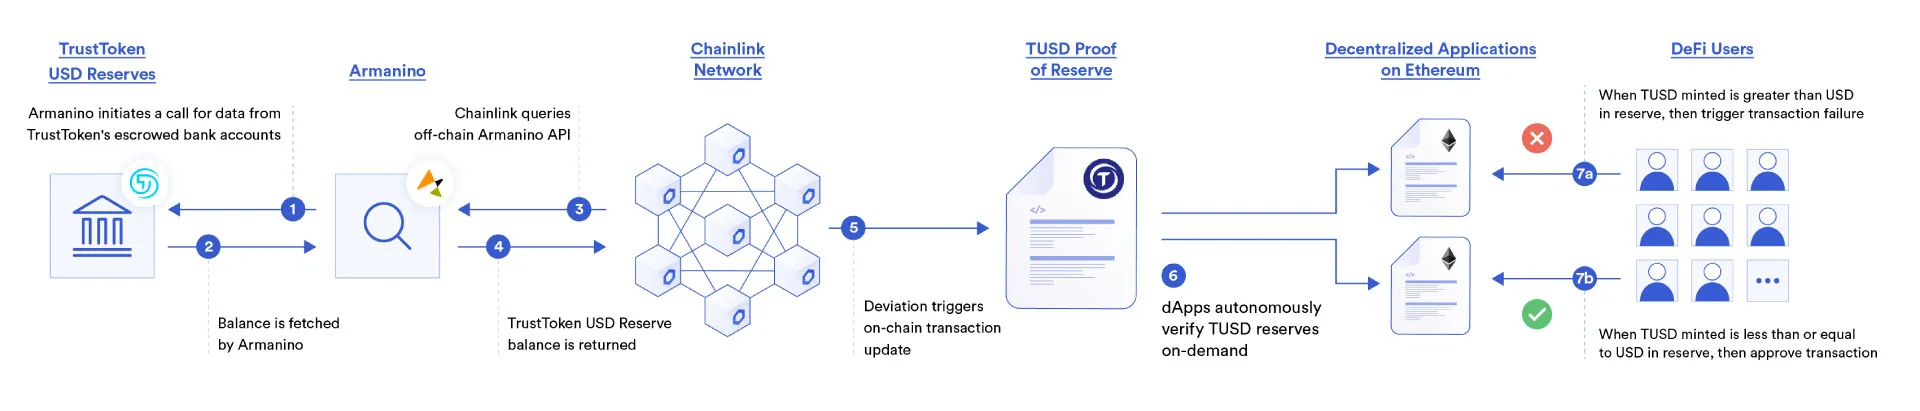 Chainlink Data Feeds: Off-Chain Data for Smart Contracts | Chainlink